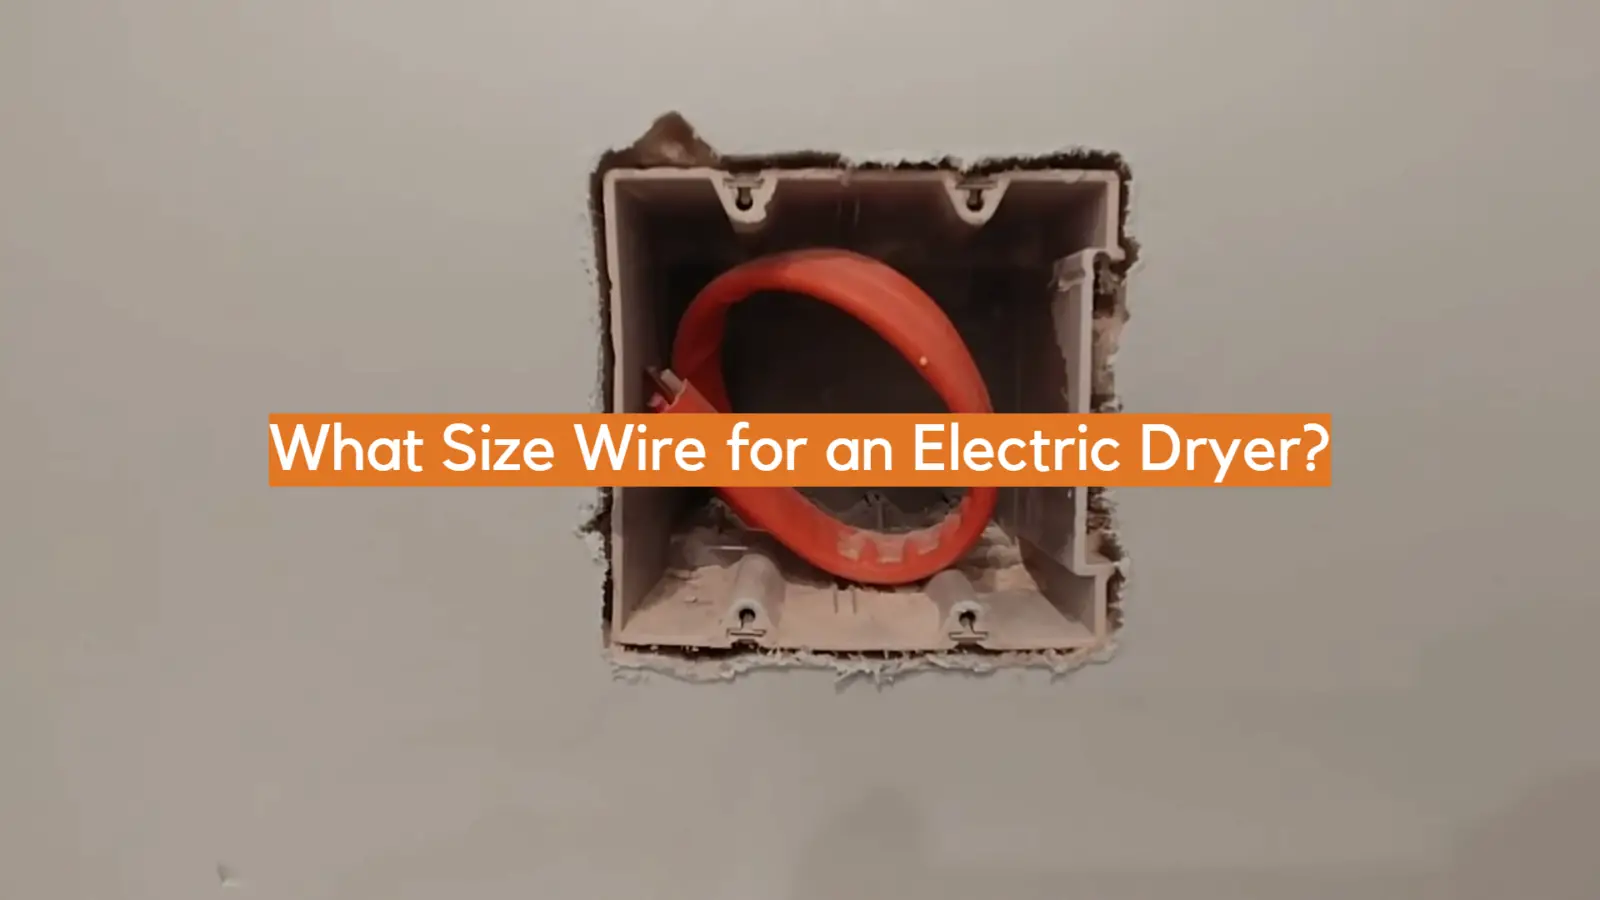 What Size Wire for an Electric Dryer?